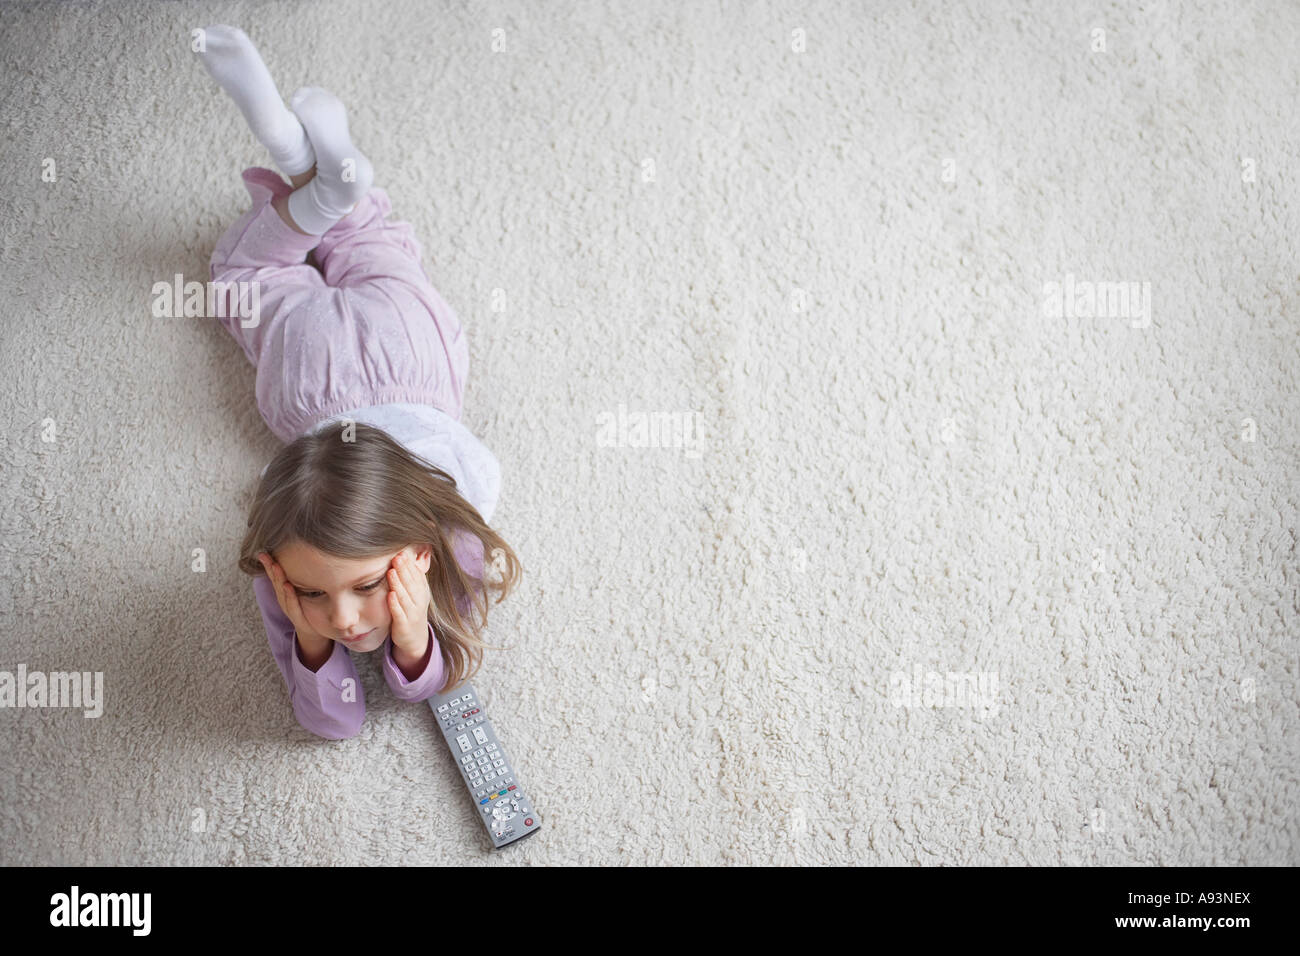 Girl (5-6) lying on rug, view from above Stock Photo